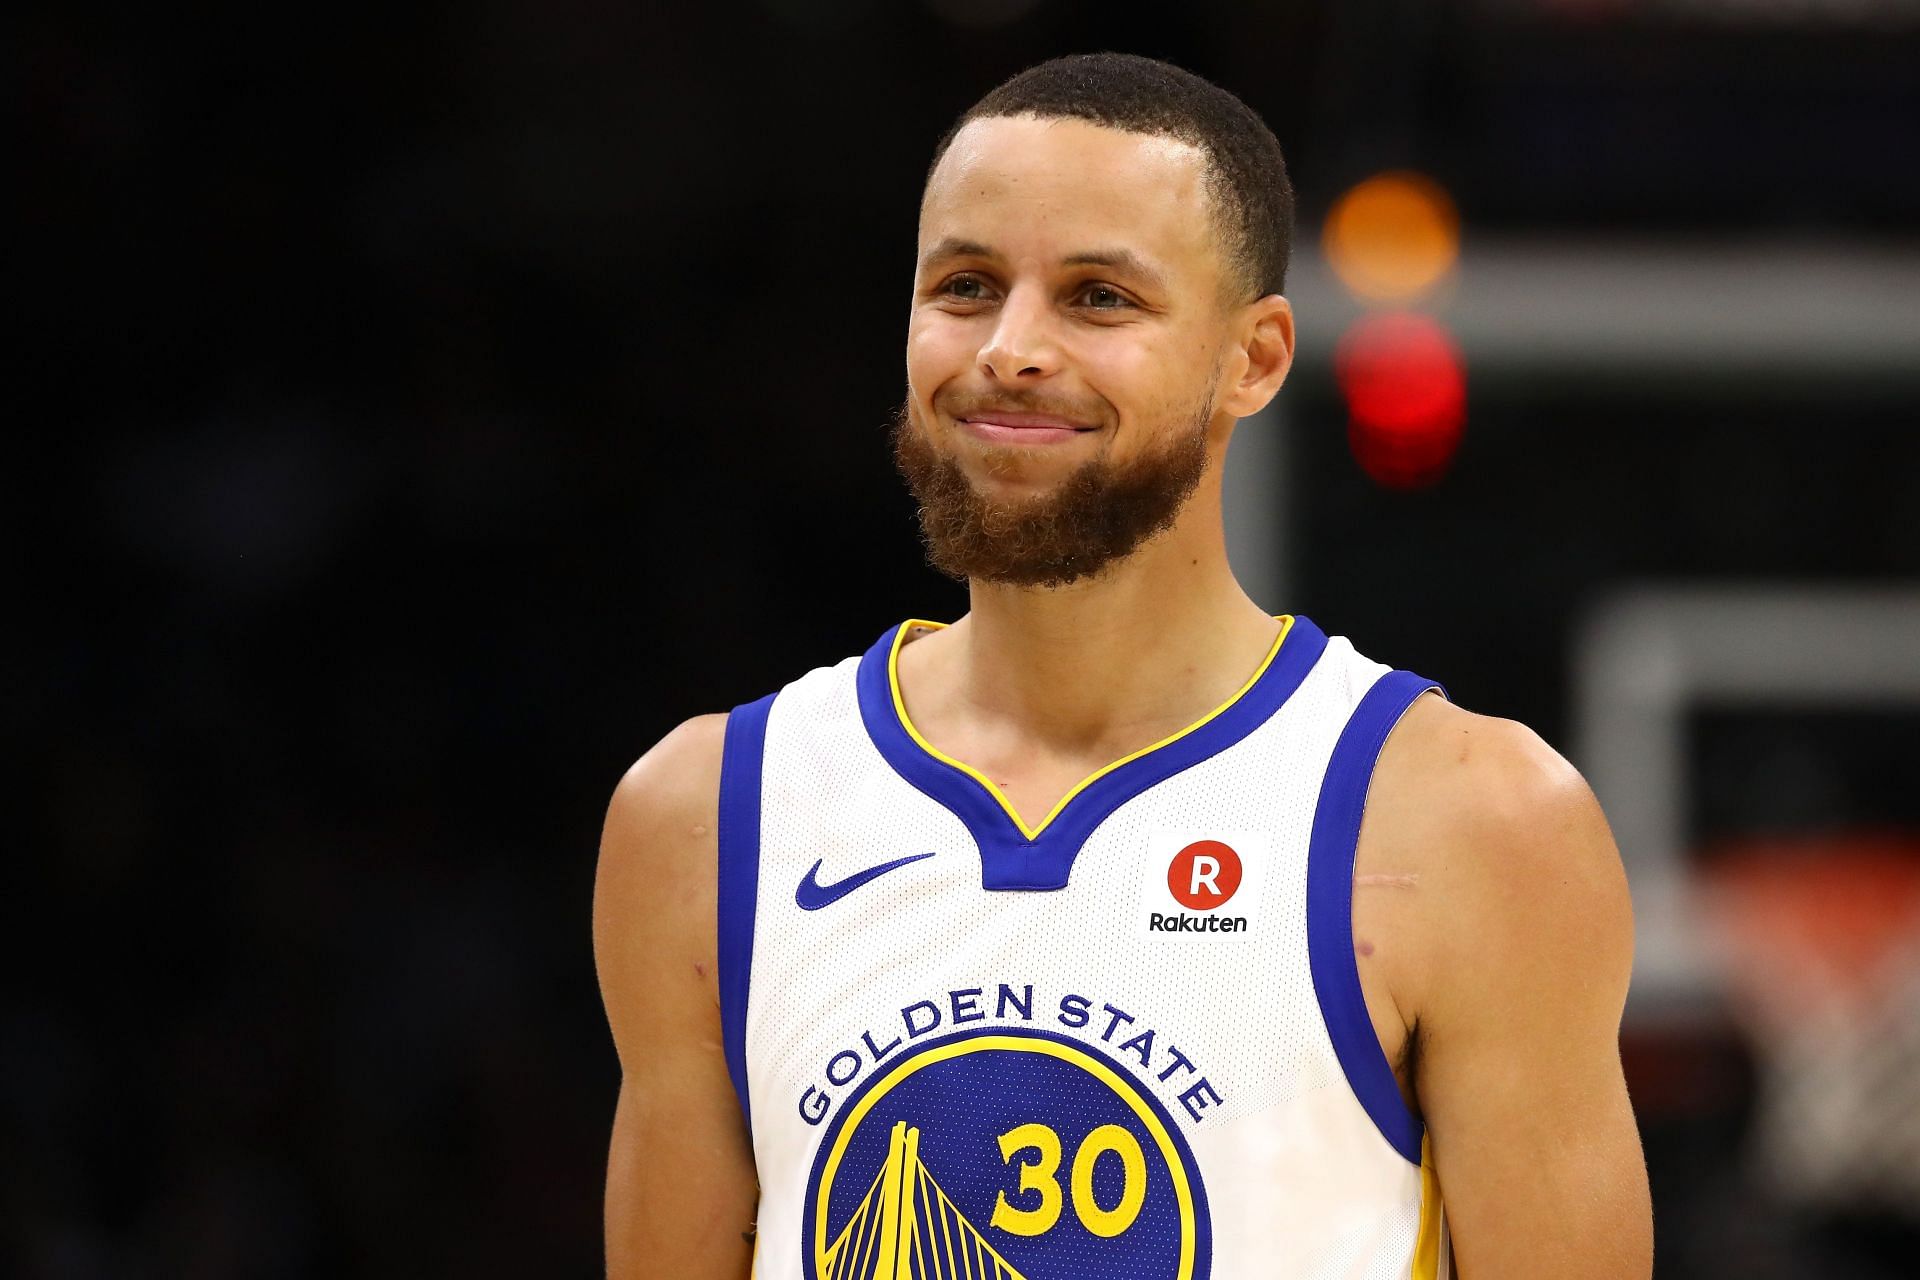 Steph Curry at the 2018 NBA Finals